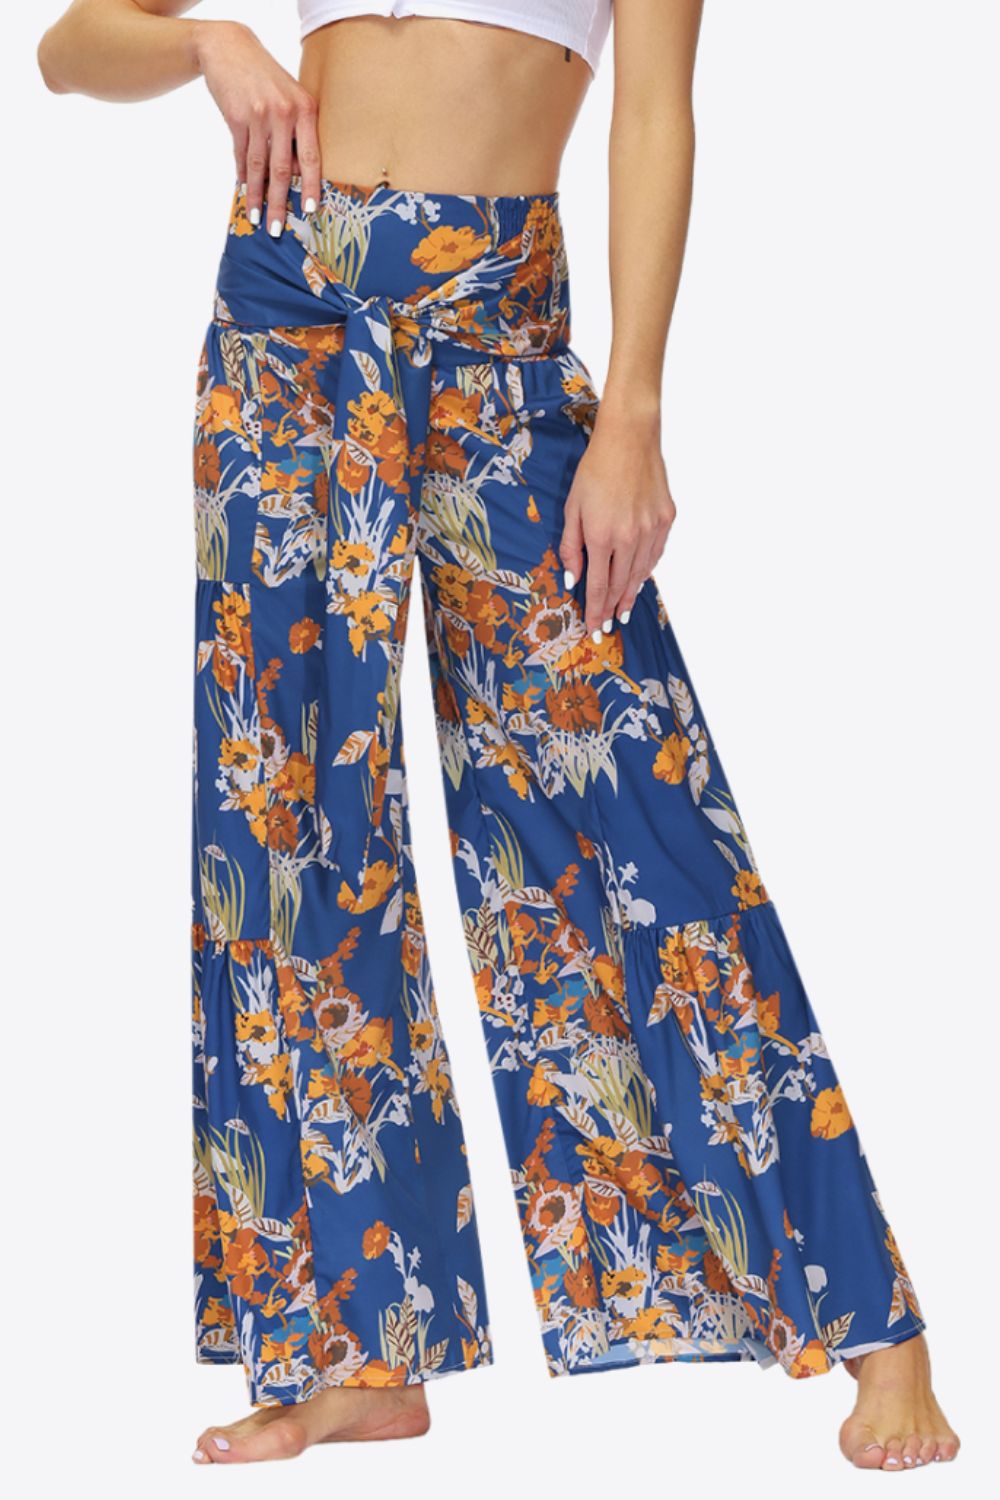 Patterned Tie Banded Waist Low Rise Culottes